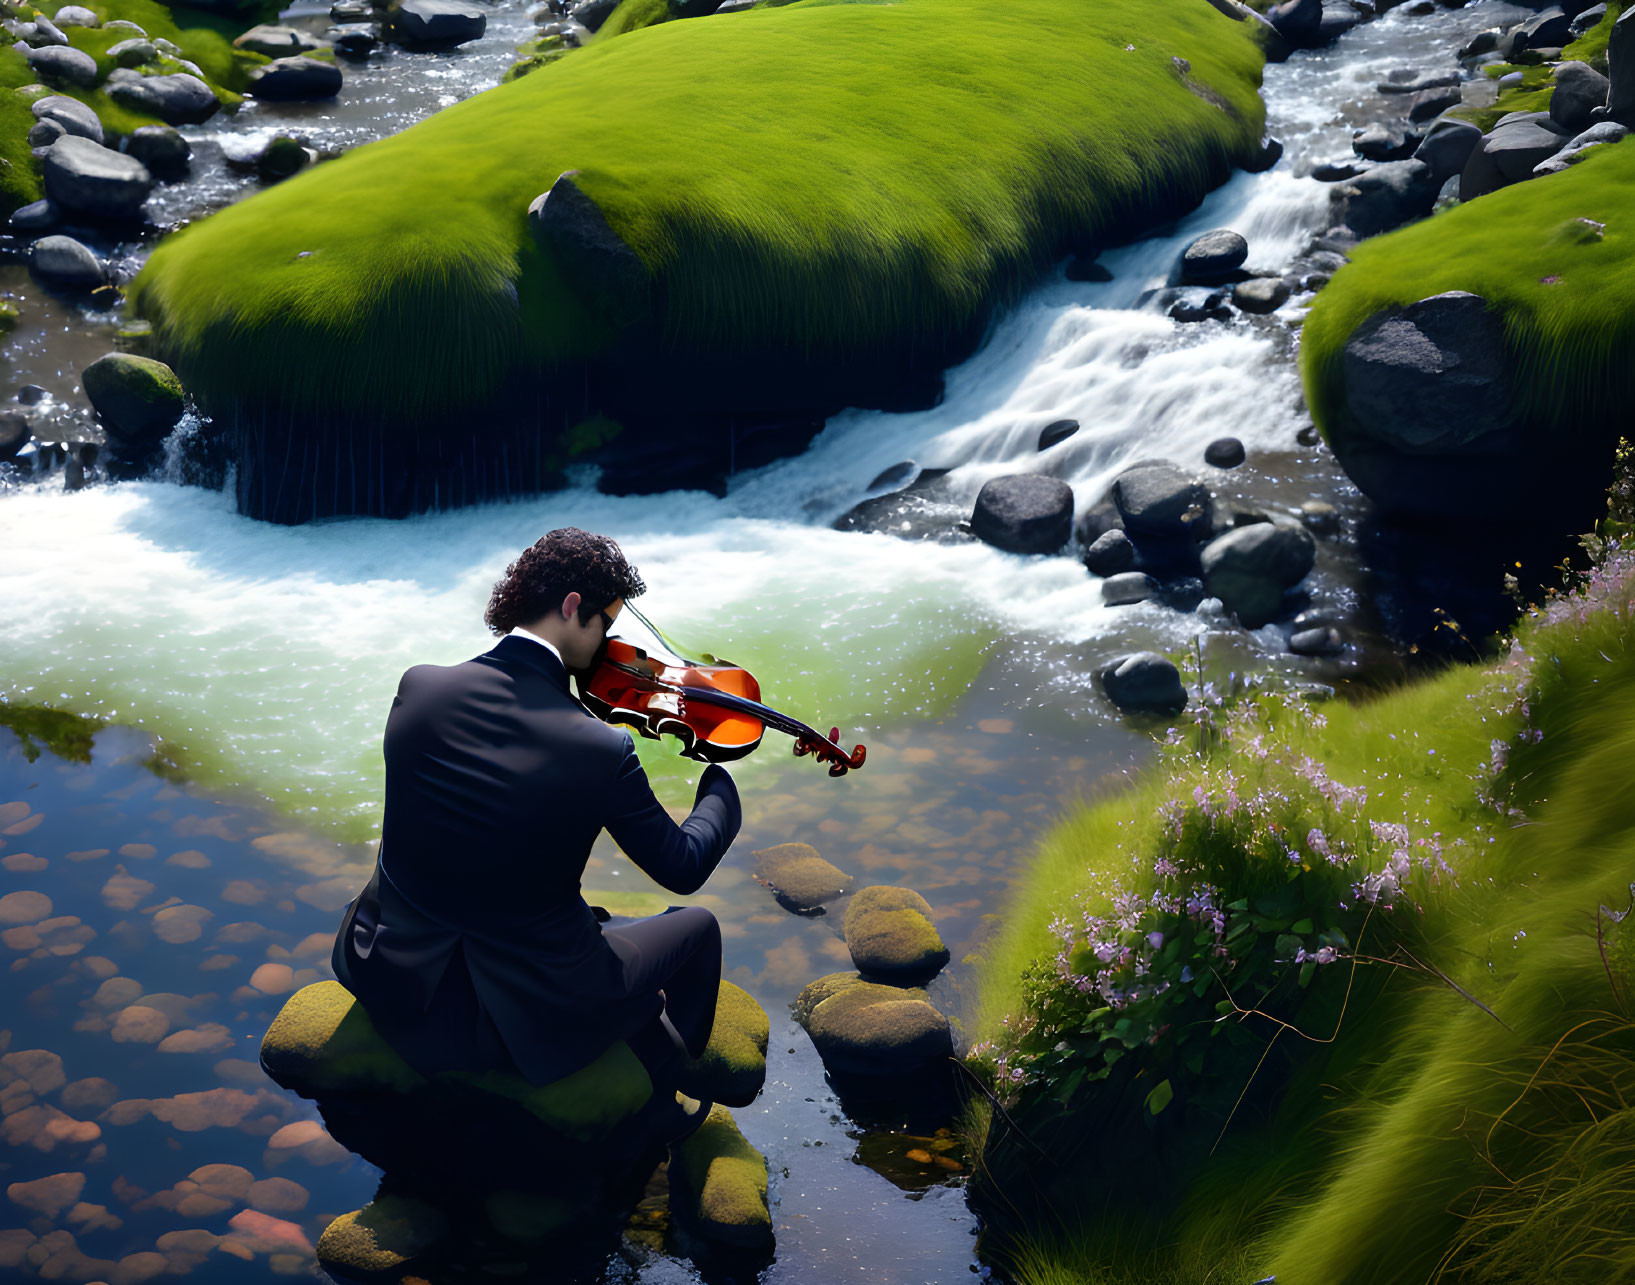 Man in suit plays violin on rocky riverbank with lush greenery & flowing water